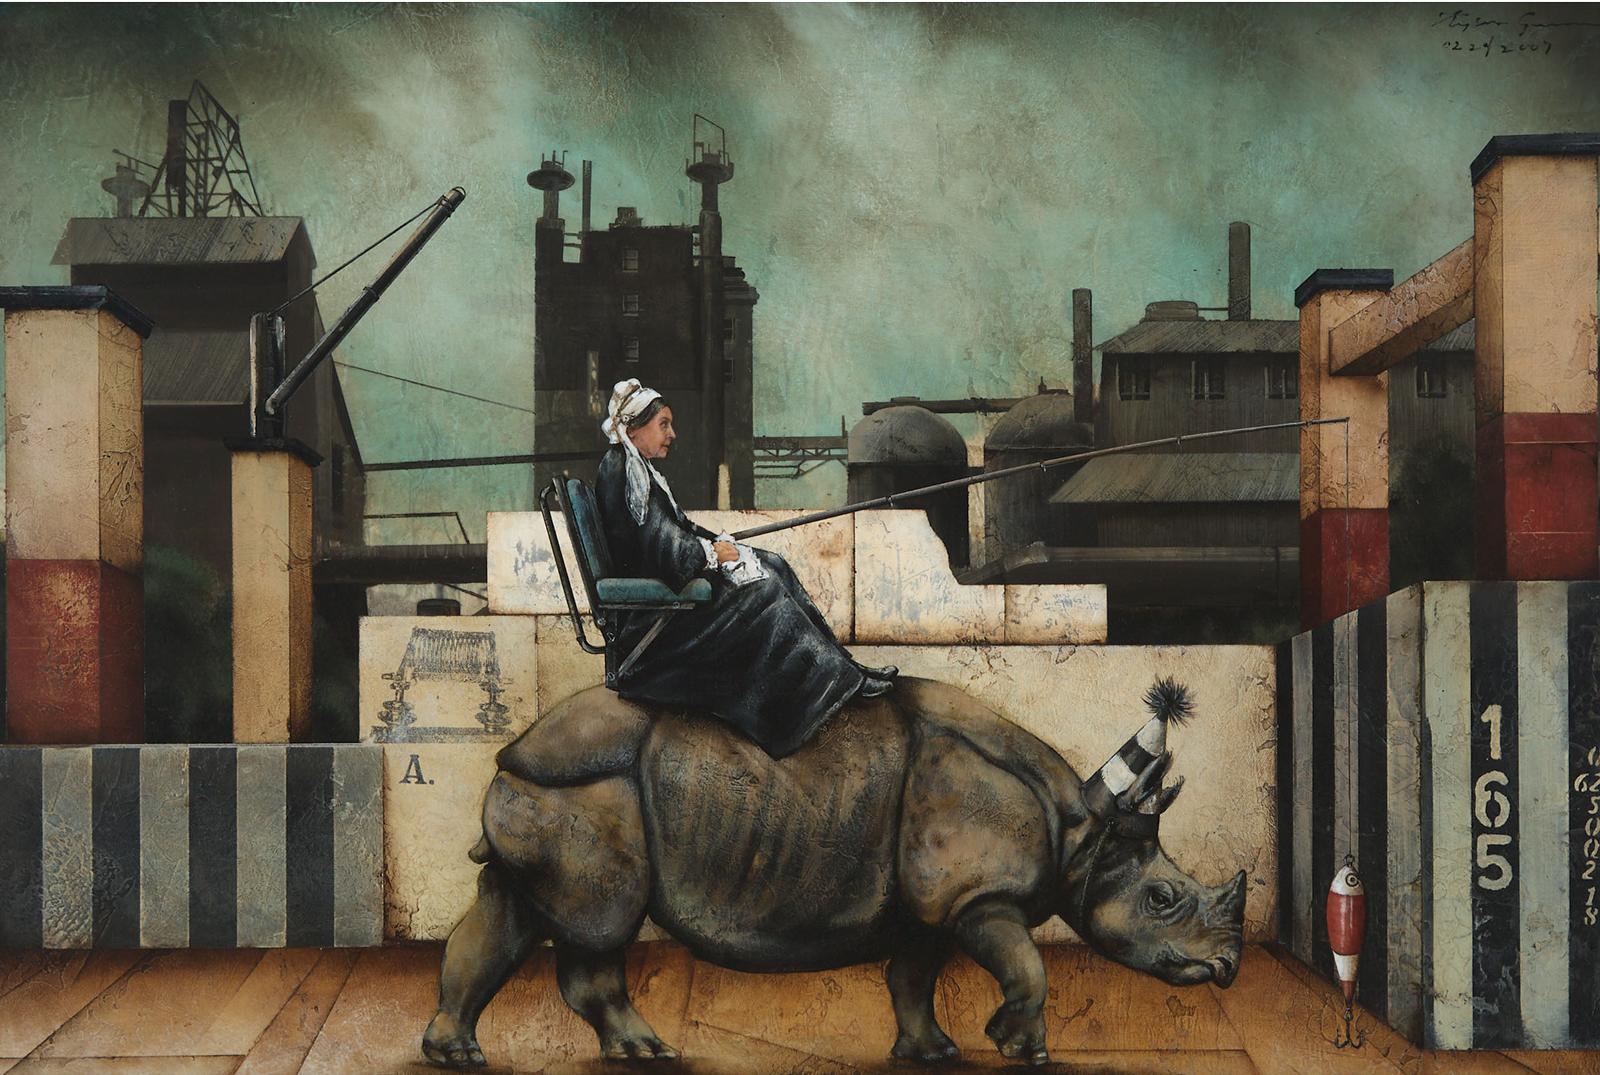 Tyson Grumm (1972) - The Rhinocliner (As Demonstrated By Whistler's Mother), 2007